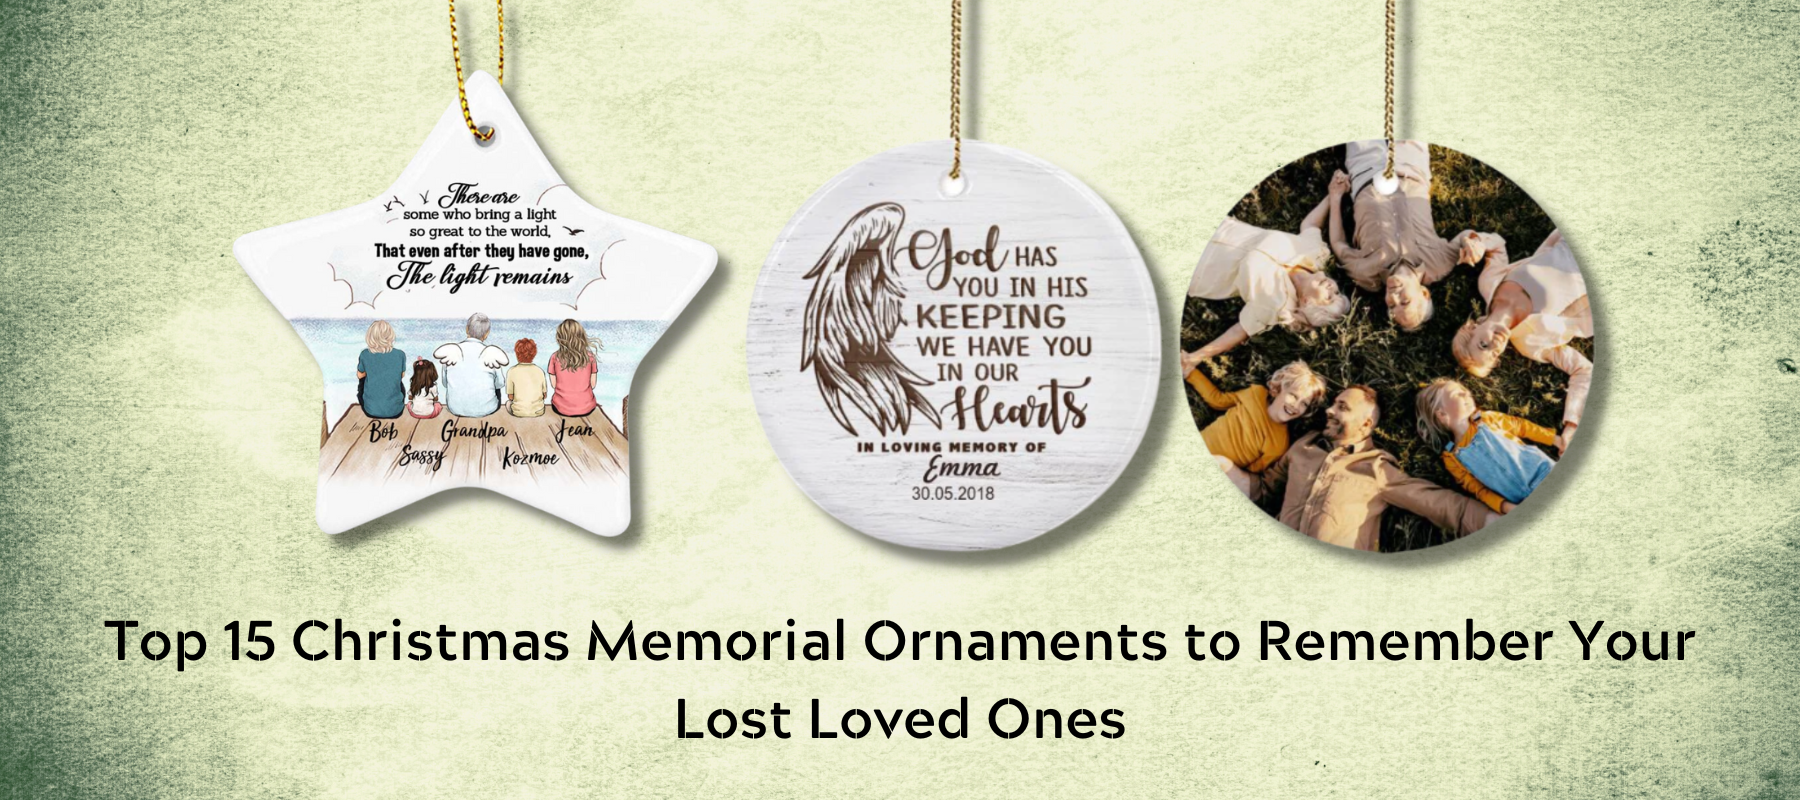 Top 15 Christmas Memorial Ornaments to Remember Your Lost Loved Ones